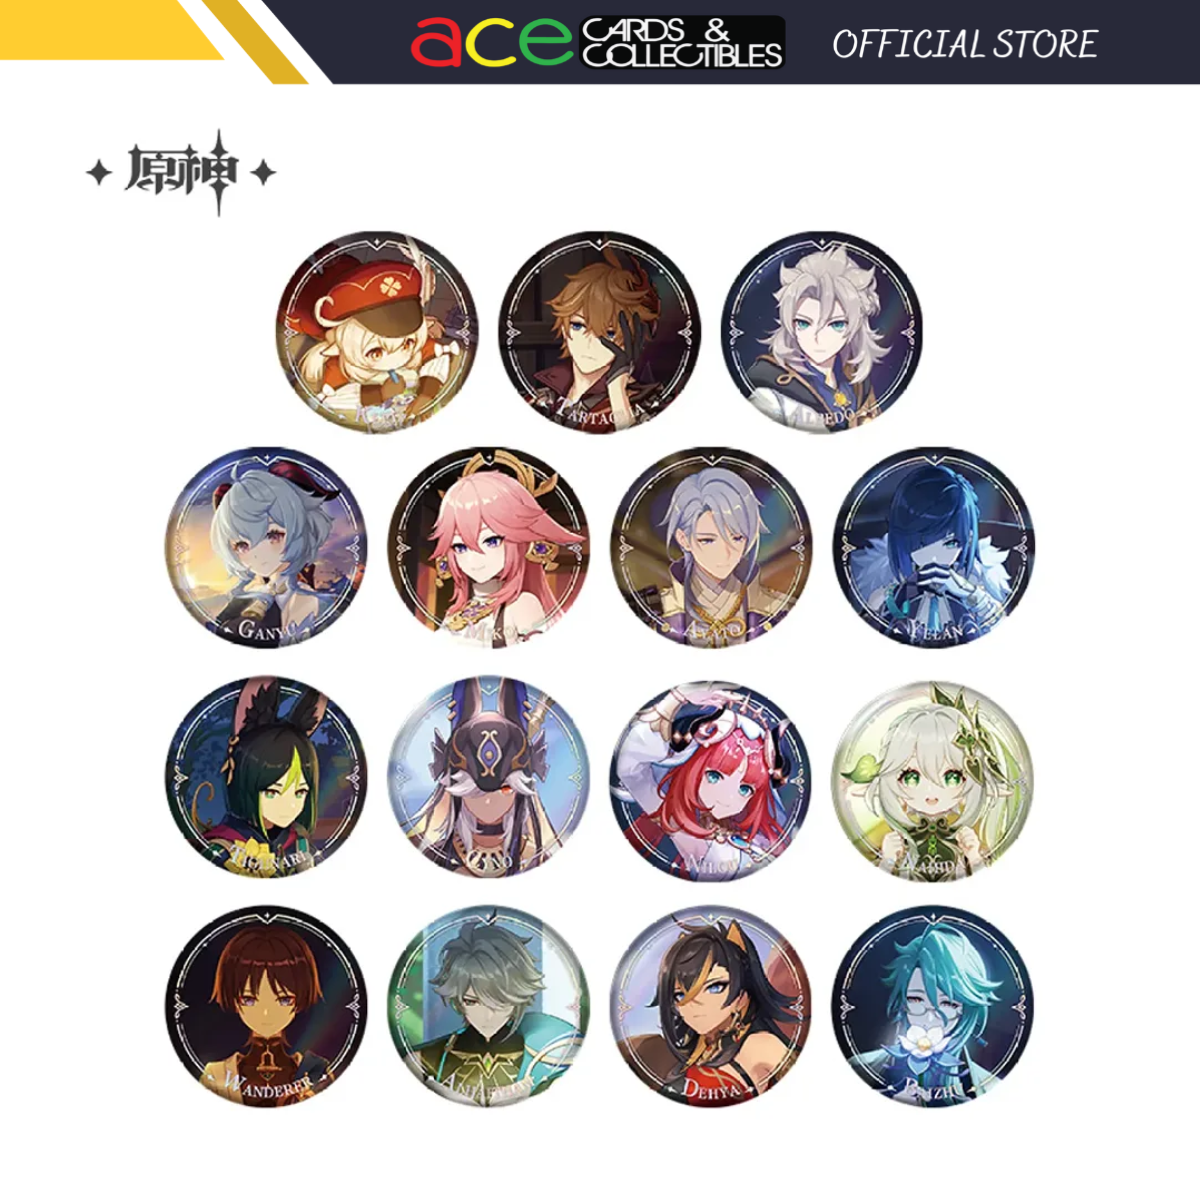 miHoYo Genshin Impact Character PV Badge-Klee-miHoYo-Ace Cards & Collectibles